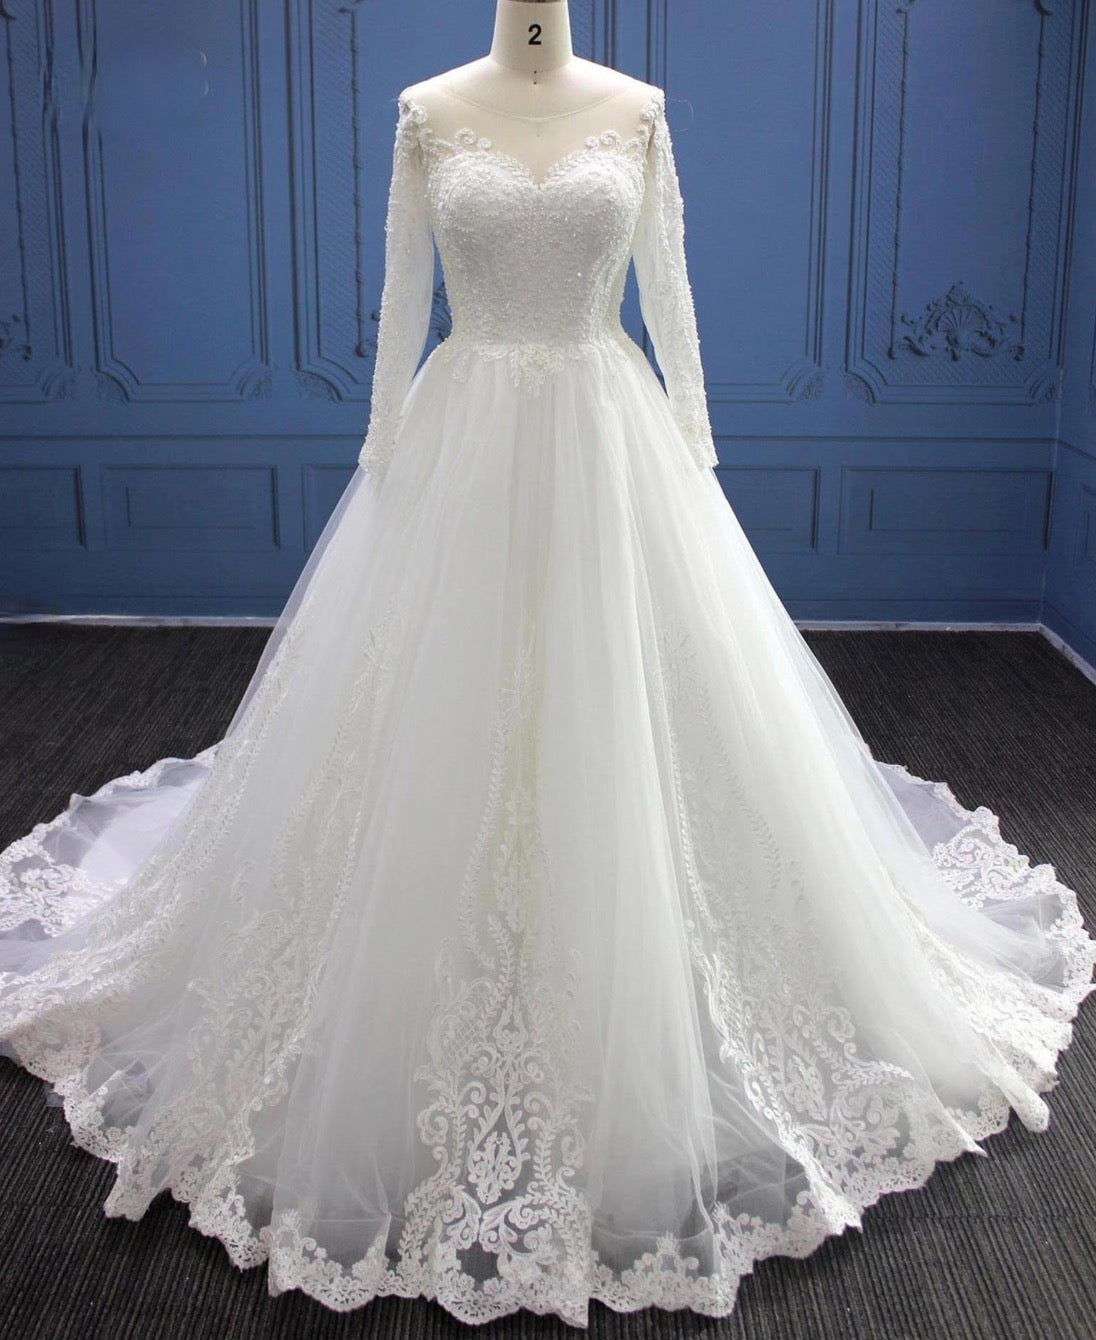 Long Sleeve Illusion Lace Tulle Pearl Bead A Line Wedding Dress